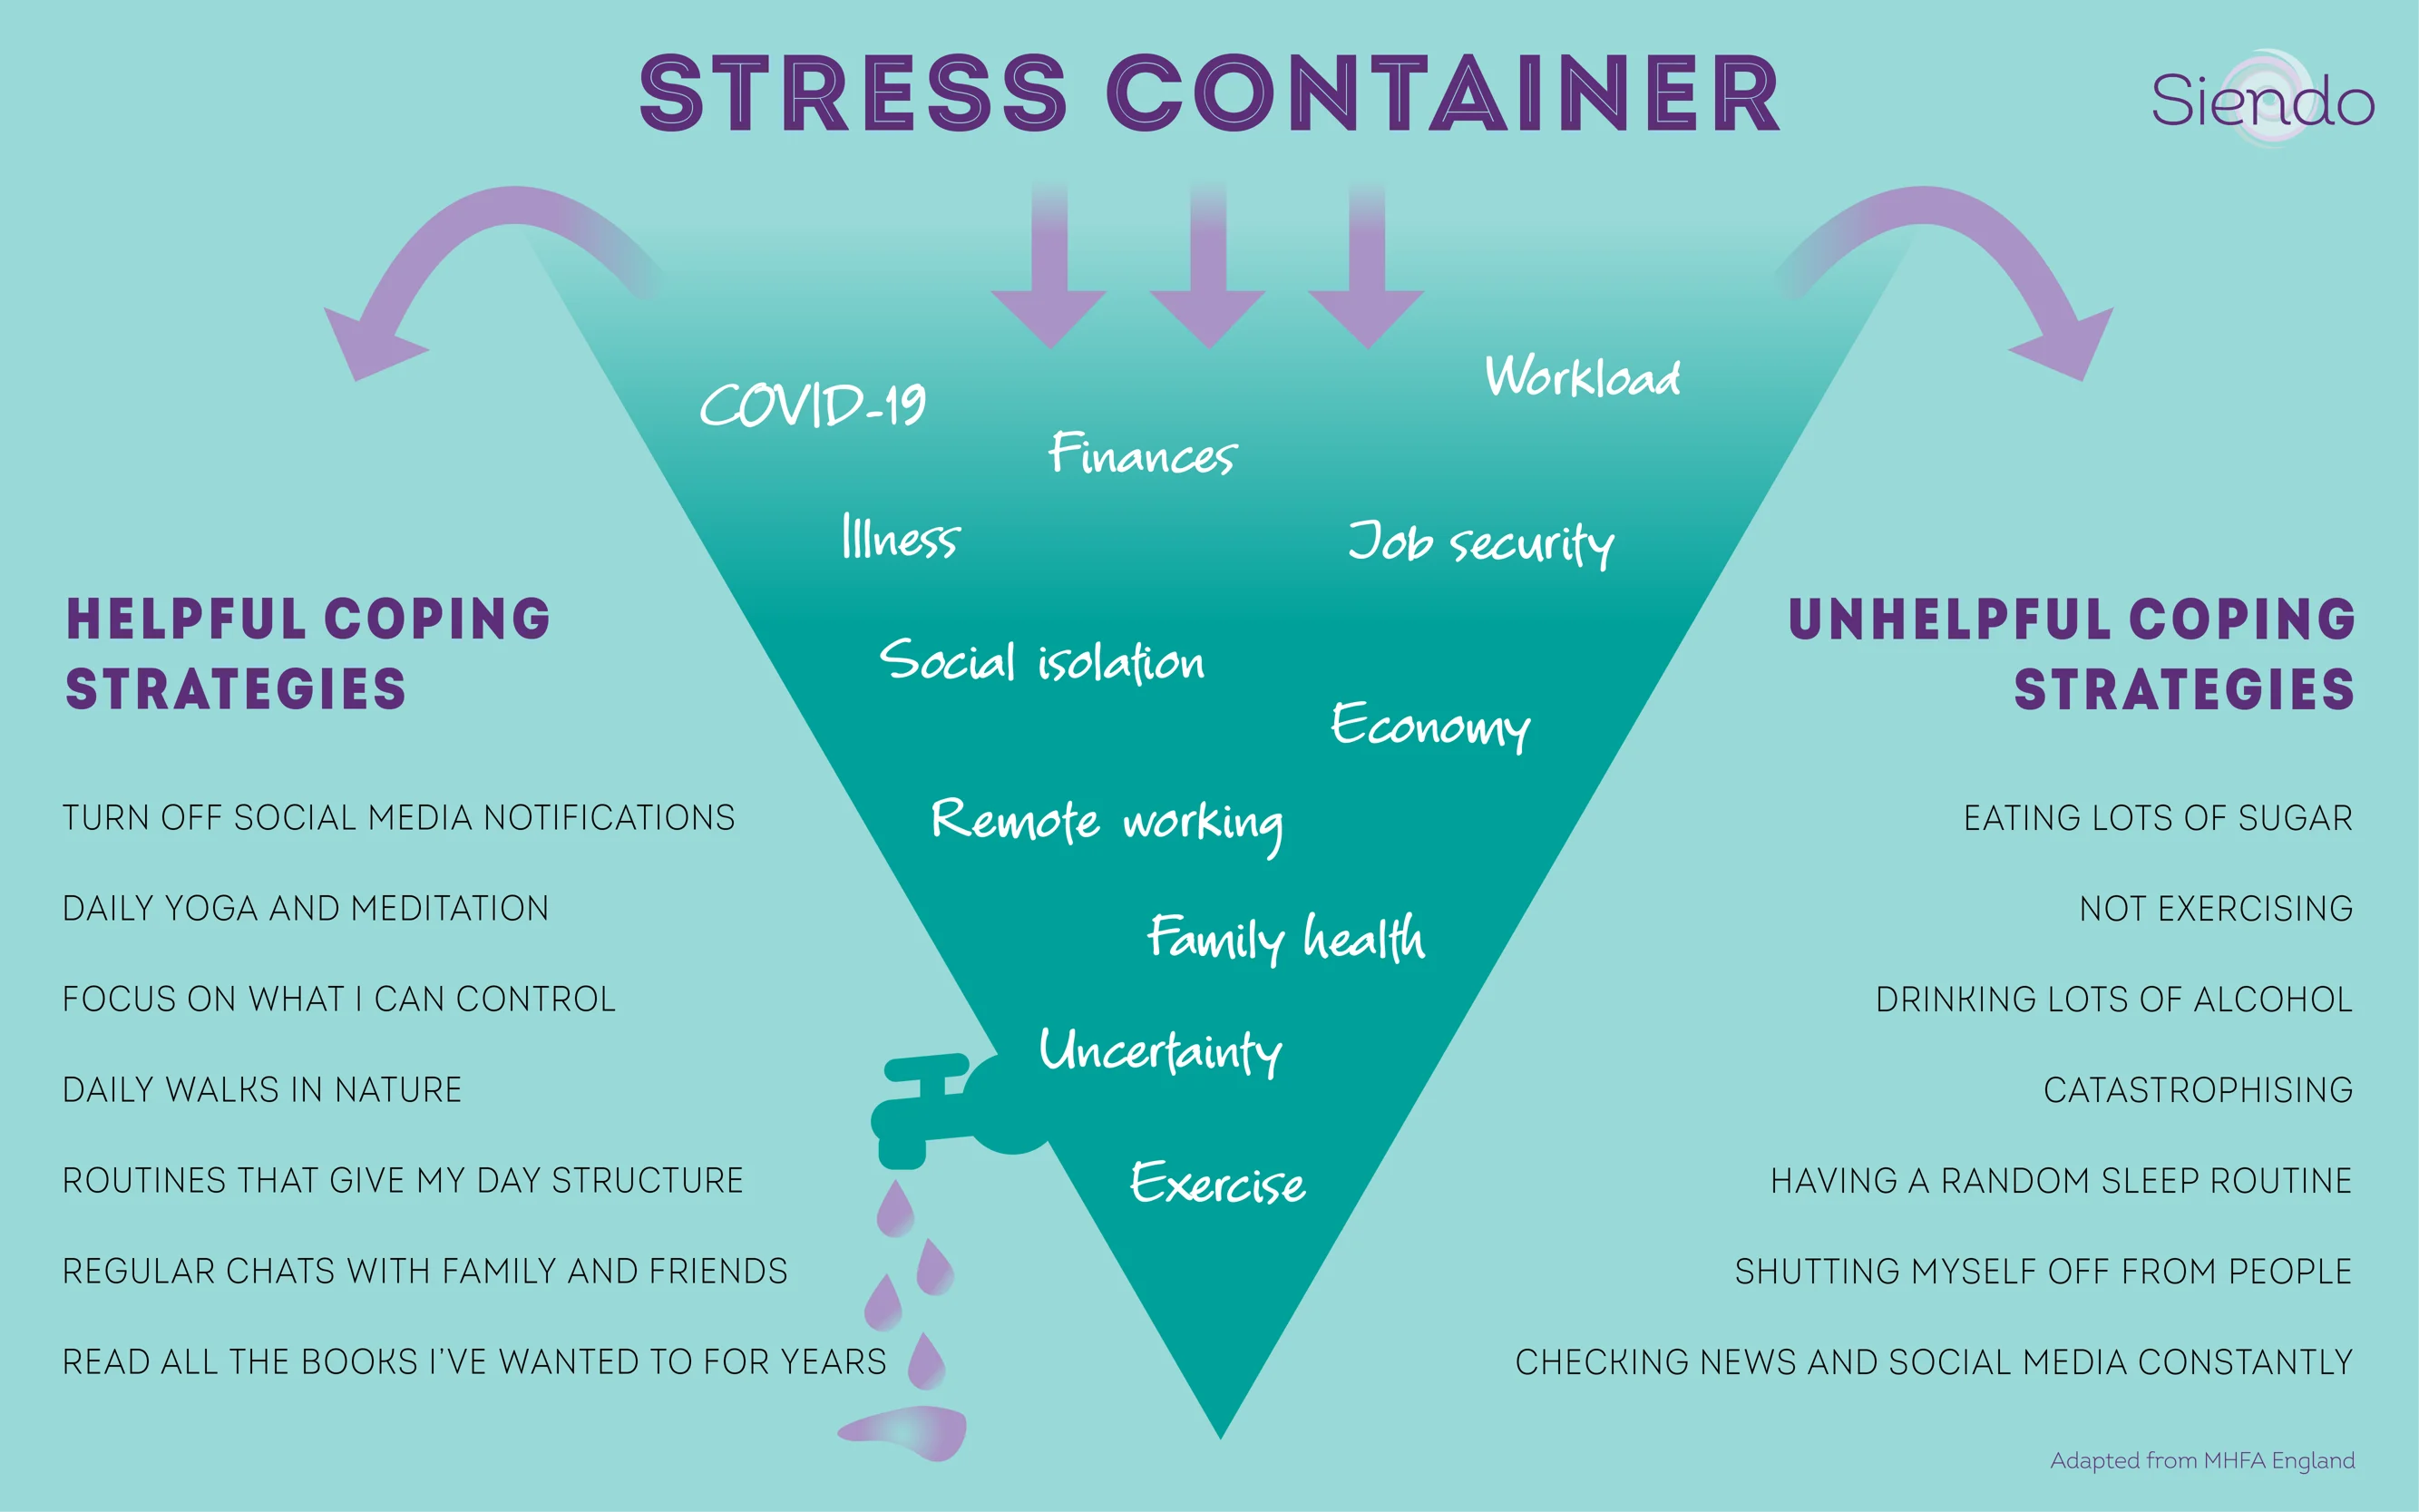 Example stress container